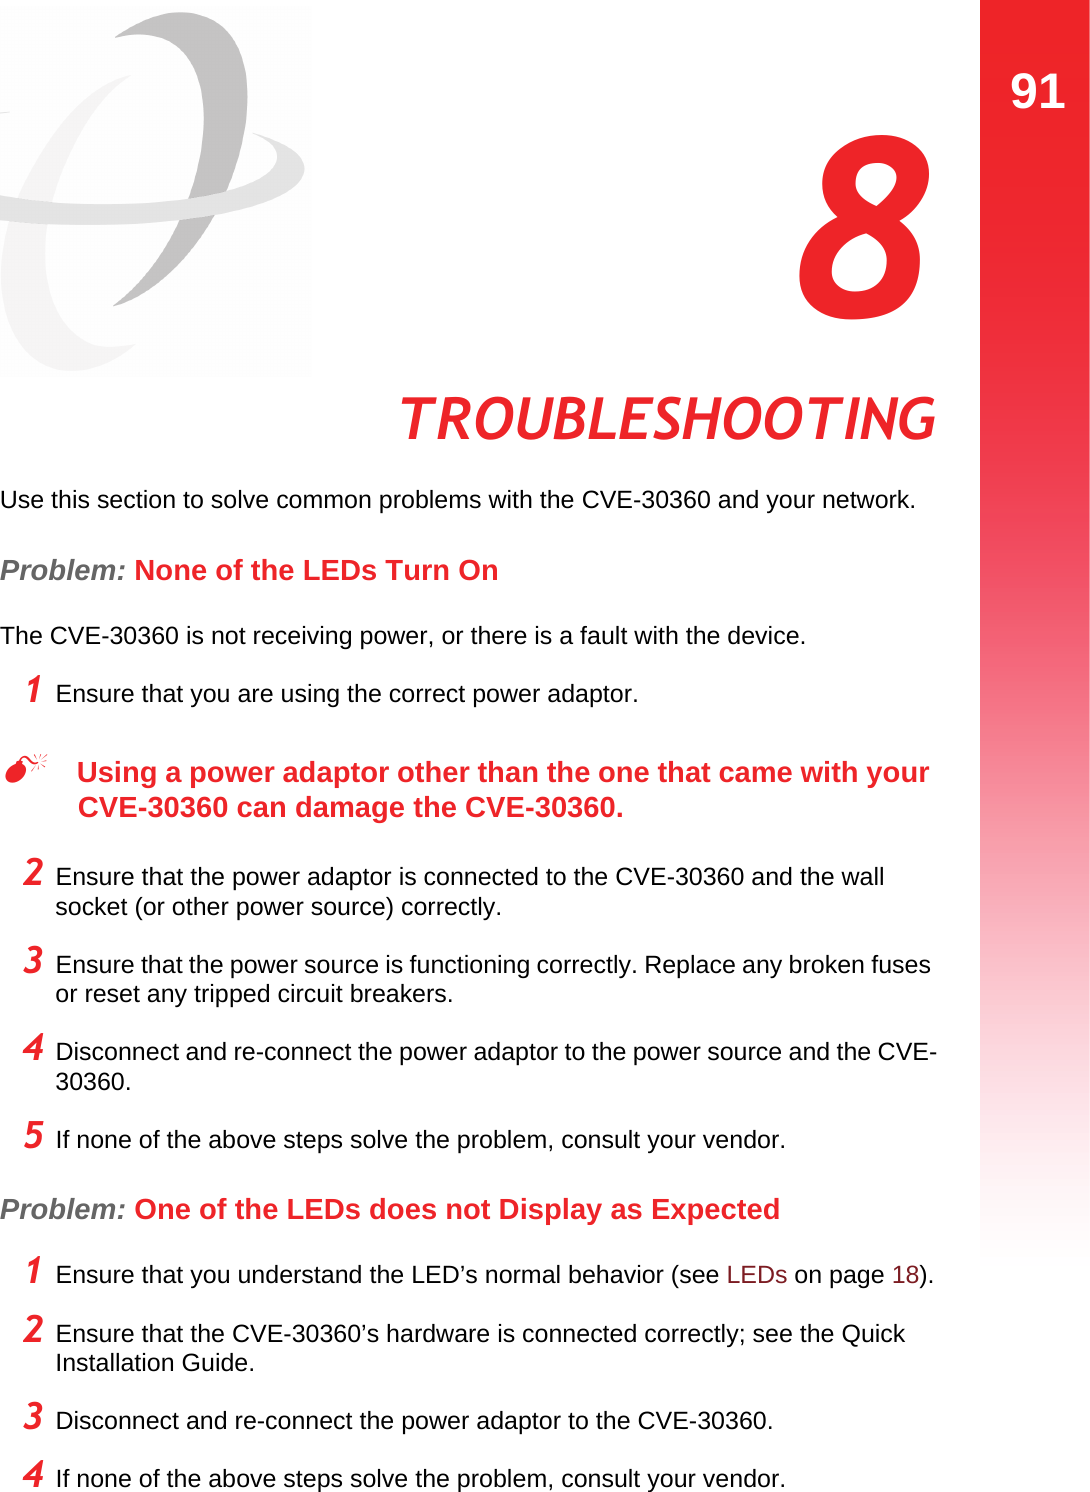 91TROUBLESHOOTING  8 TROUBLESHOOTINGUse this section to solve common problems with the CVE-30360 and your network.Problem: None of the LEDs Turn OnThe CVE-30360 is not receiving power, or there is a fault with the device.1 Ensure that you are using the correct power adaptor.Using a power adaptor other than the one that came with your CVE-30360 can damage the CVE-30360.2 Ensure that the power adaptor is connected to the CVE-30360 and the wall socket (or other power source) correctly.3 Ensure that the power source is functioning correctly. Replace any broken fuses or reset any tripped circuit breakers.4 Disconnect and re-connect the power adaptor to the power source and the CVE-30360.5 If none of the above steps solve the problem, consult your vendor.Problem: One of the LEDs does not Display as Expected1 Ensure that you understand the LED’s normal behavior (see LEDs on page 18).2 Ensure that the CVE-30360’s hardware is connected correctly; see the Quick Installation Guide.3 Disconnect and re-connect the power adaptor to the CVE-30360.4 If none of the above steps solve the problem, consult your vendor.